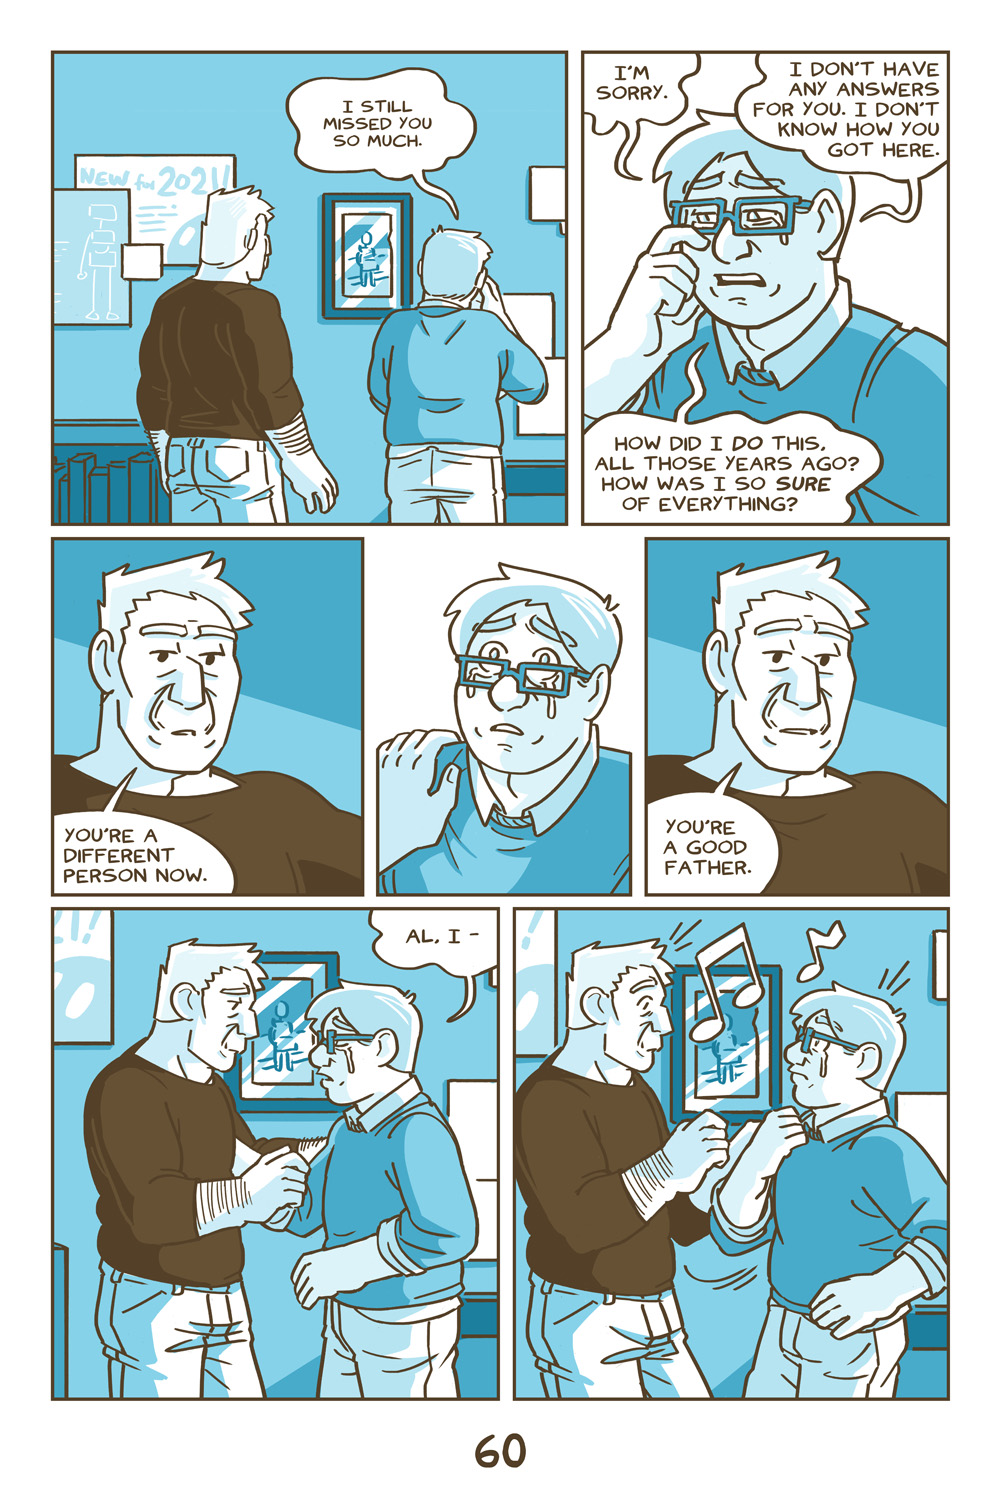 Chapter 3, Page 60